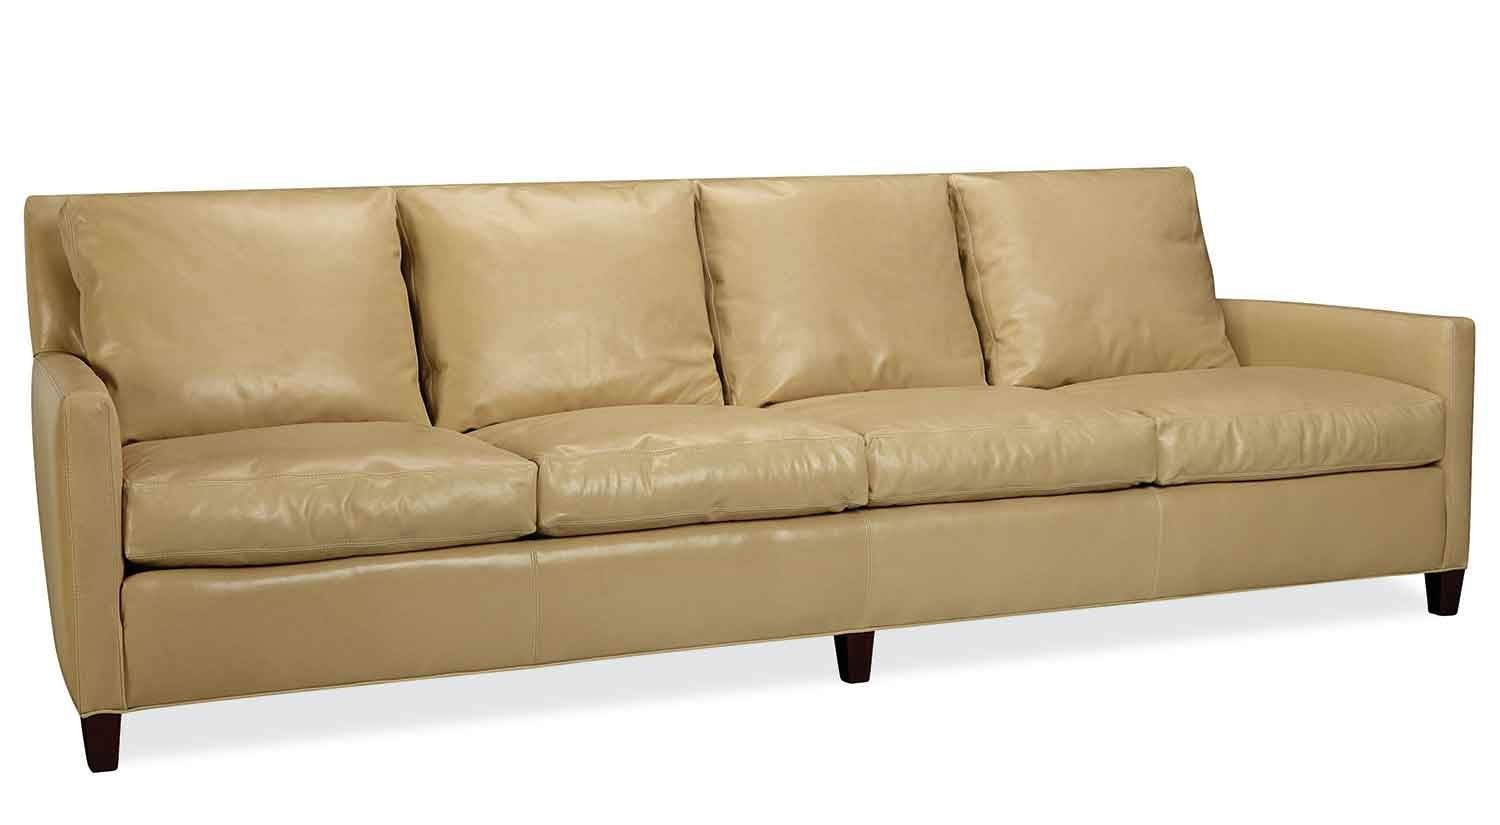 Four Seater Sofas Driade Megara Four Seater Sofa Seater Fabric Pertaining To 4 Seat Couch (View 1 of 15)